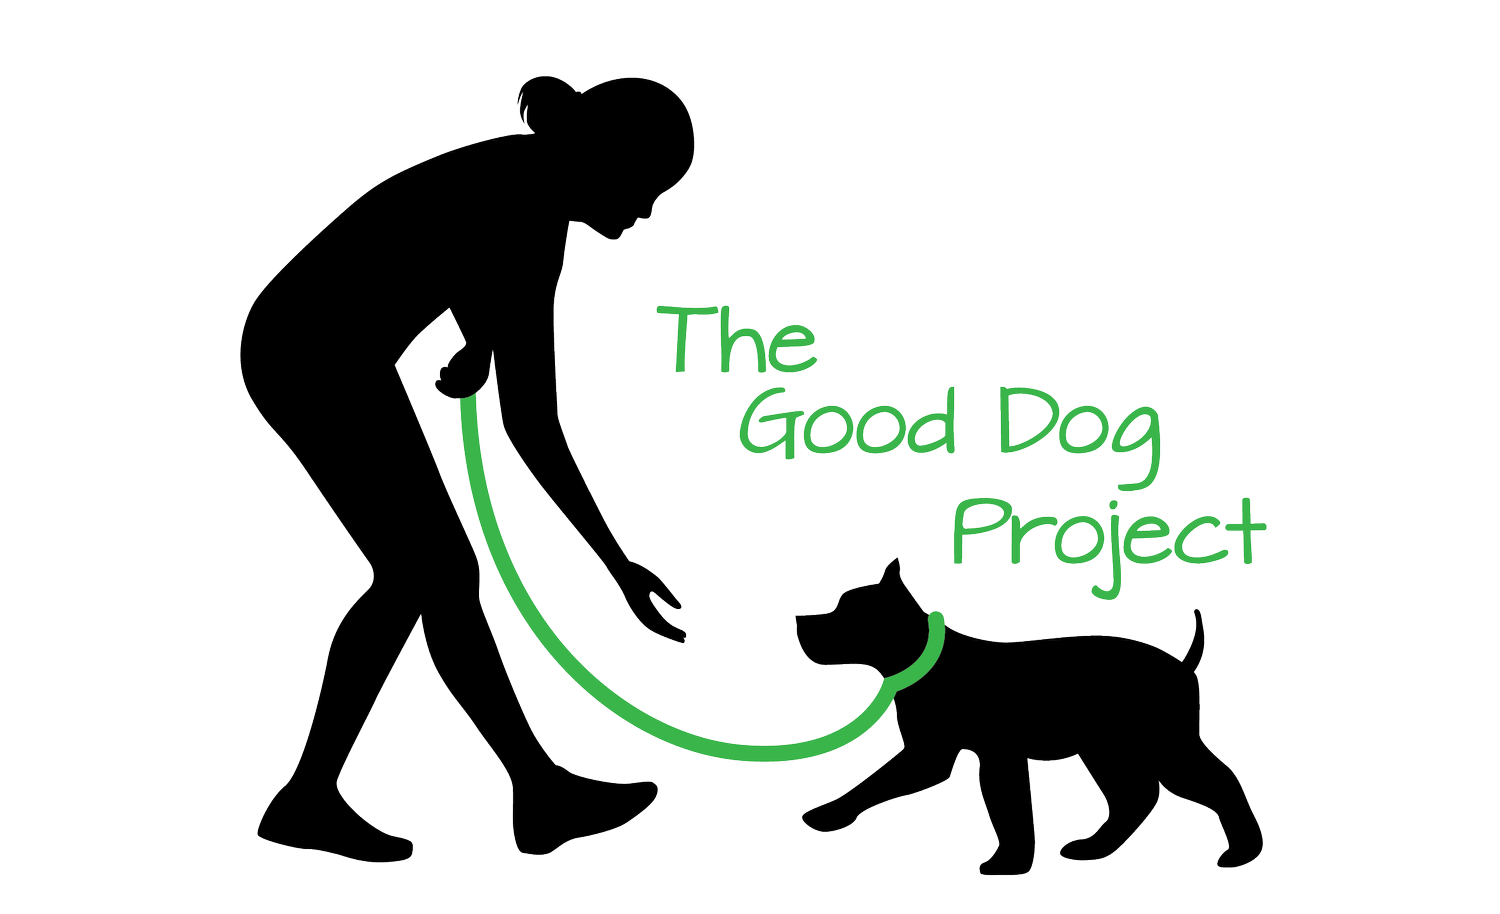 The Good Dog Project